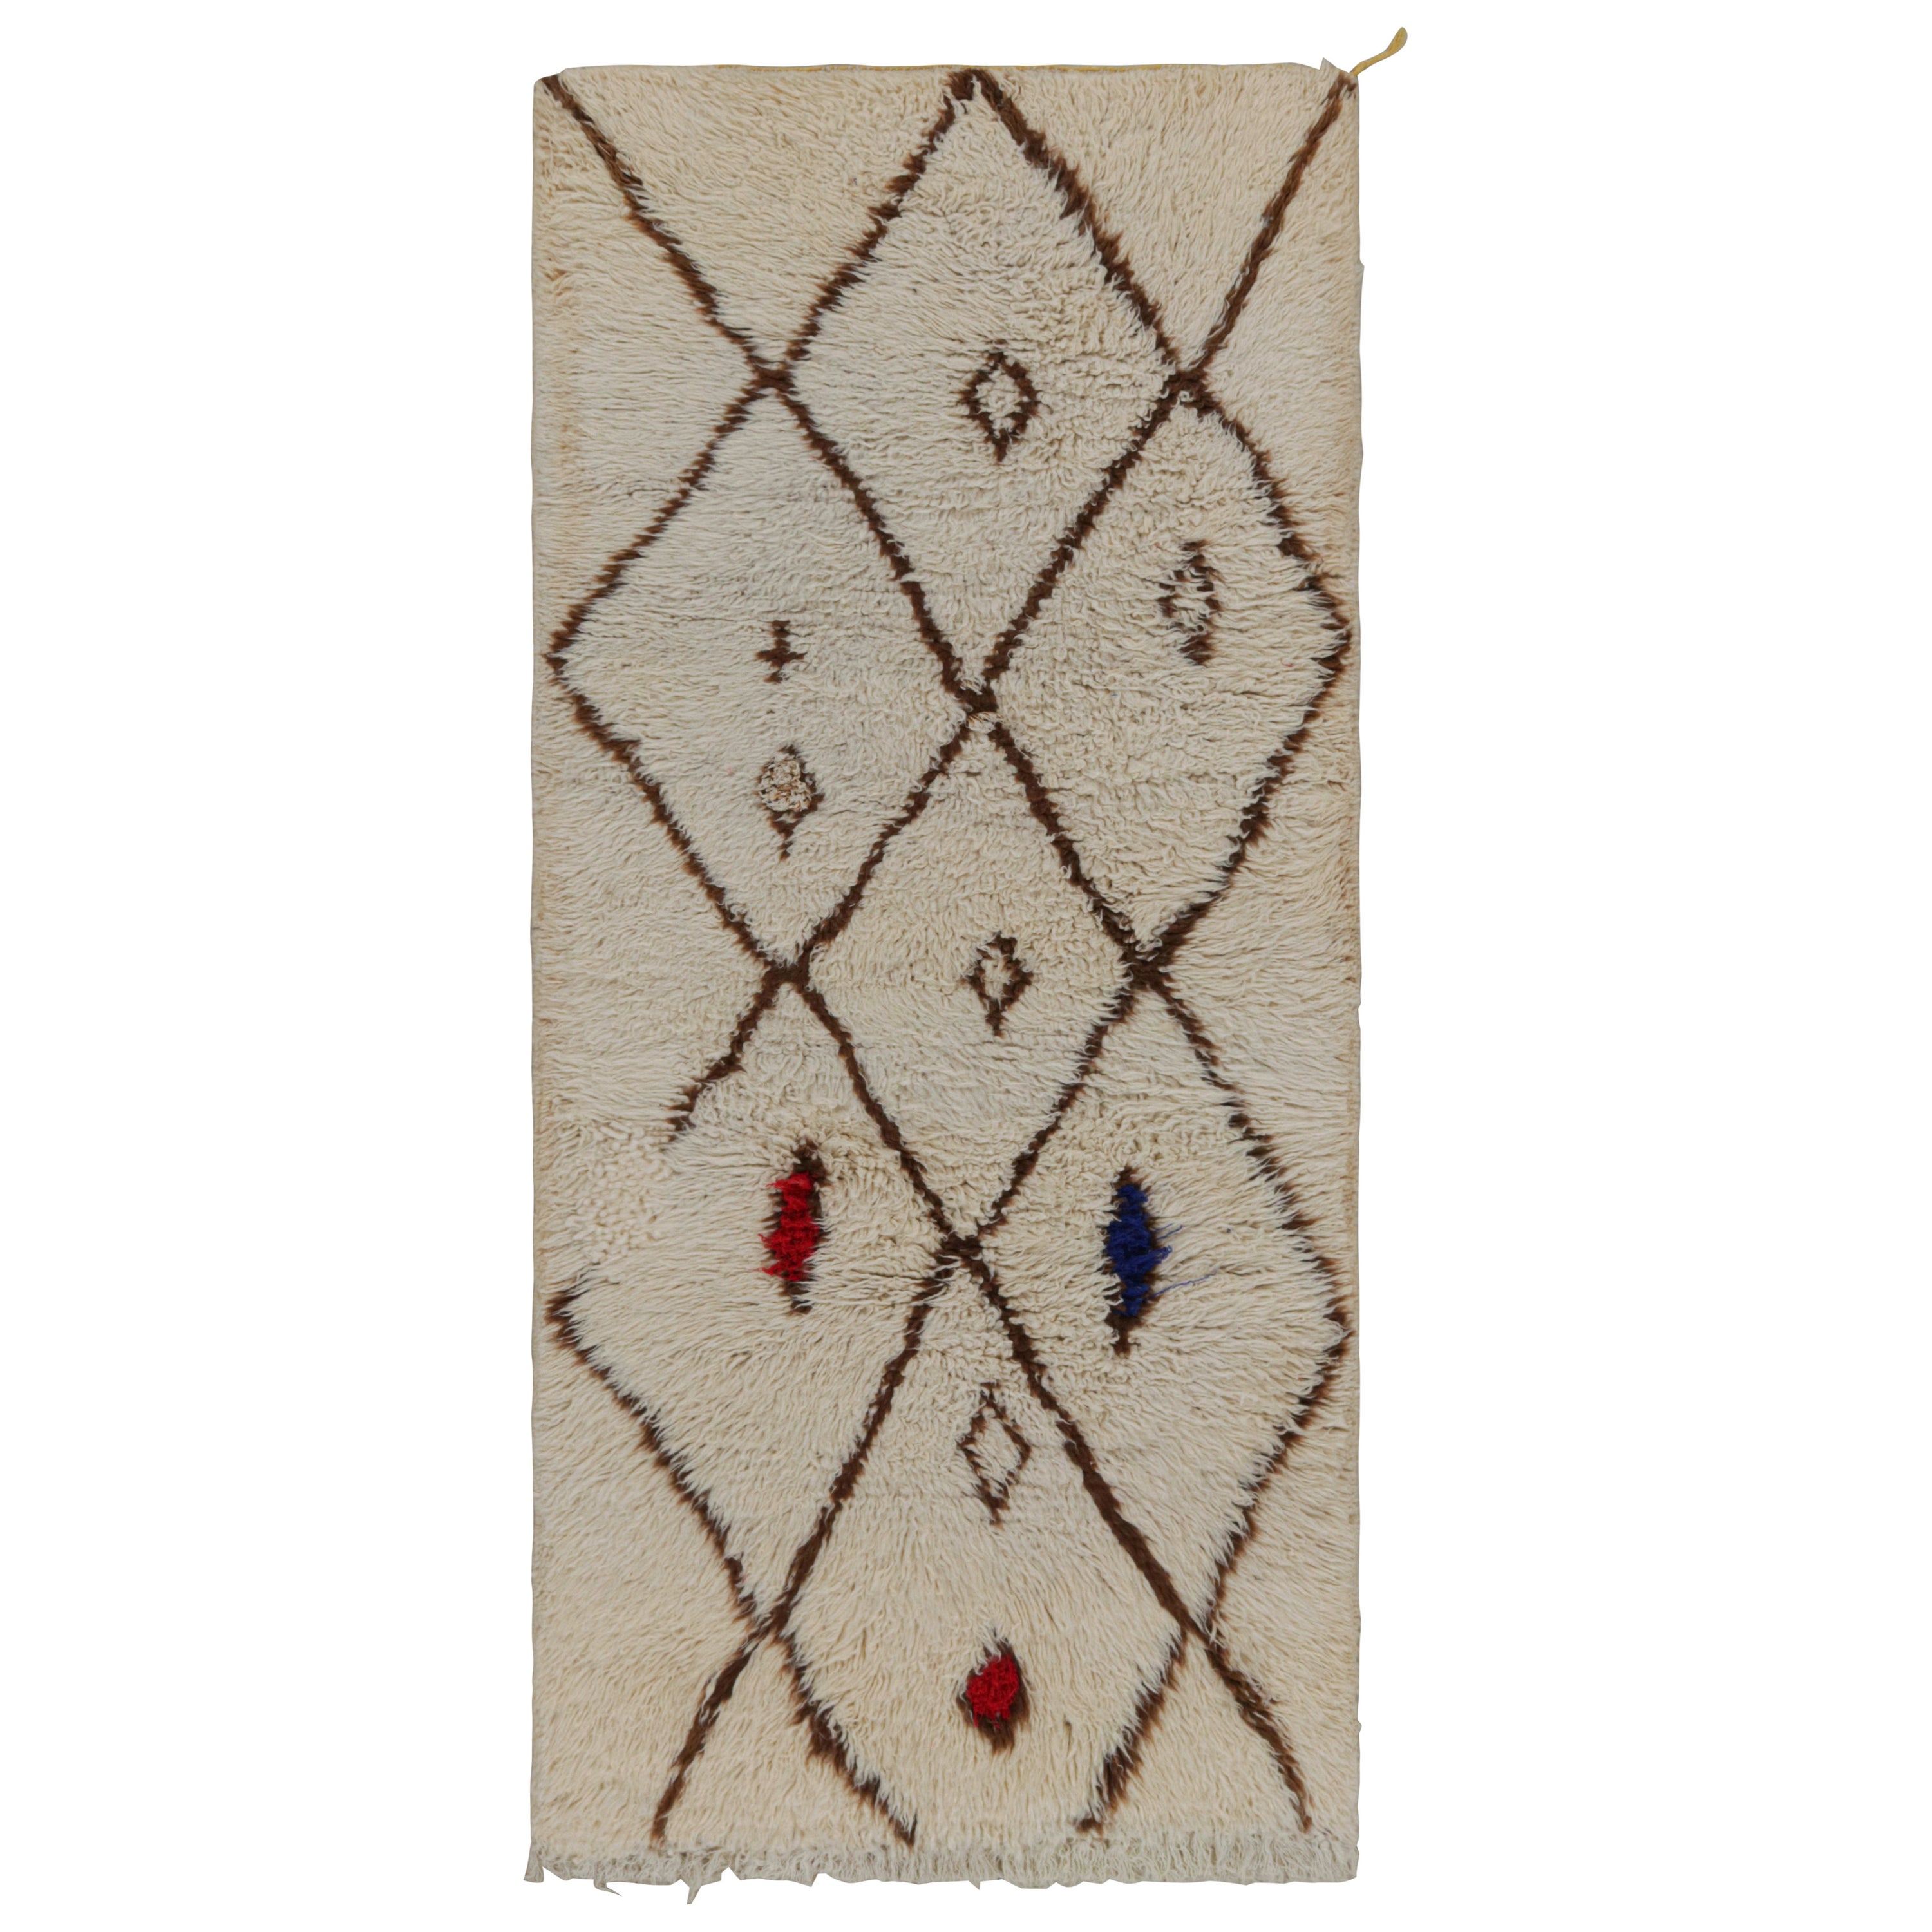 1950s Azilal Moroccan runner rug with Beige-Brown Patterns by Rug & Kilim